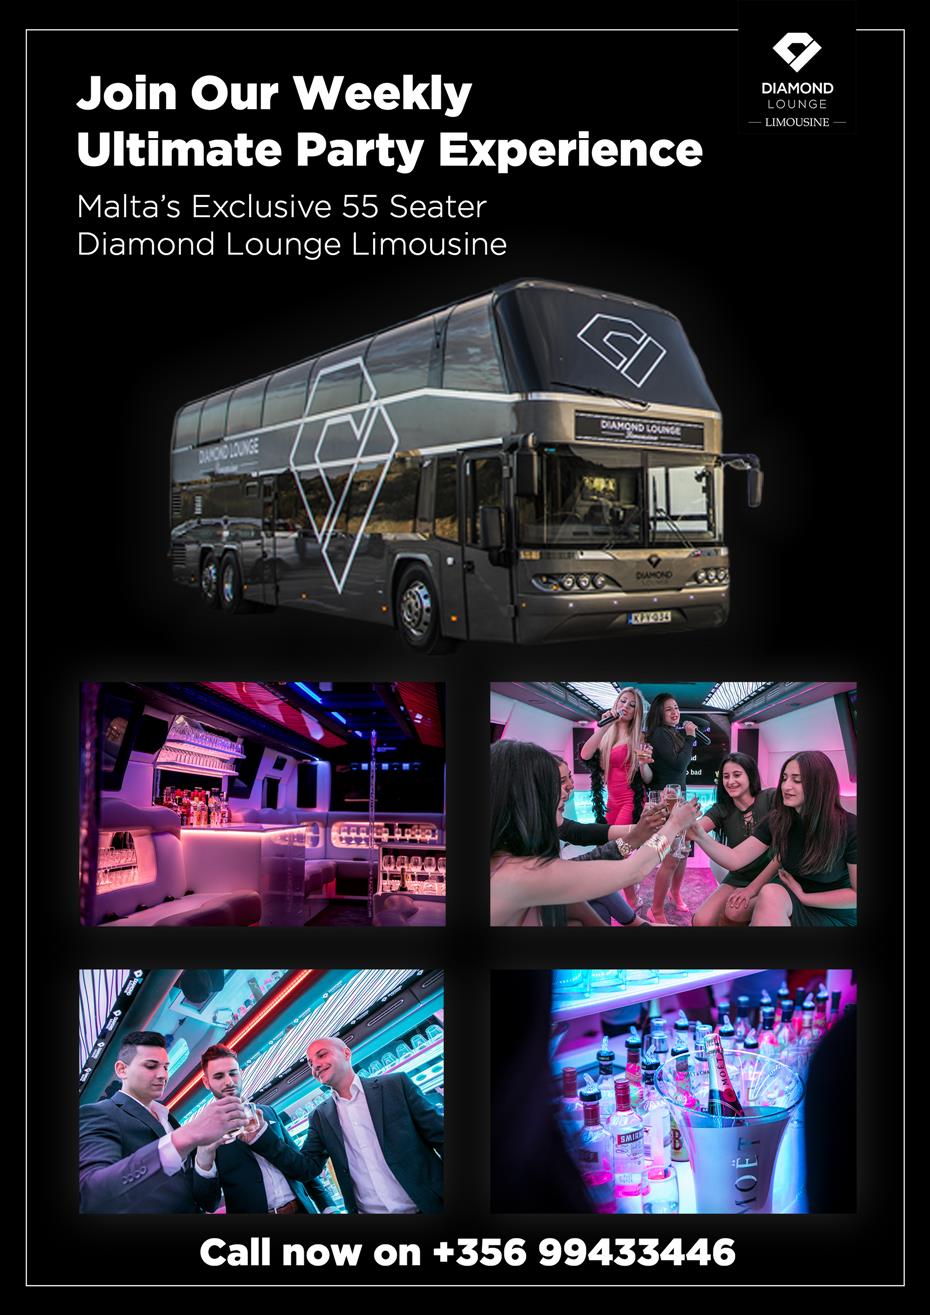 Diamond Lounge Limousine: The Ultimate Party Experience In Malta poster